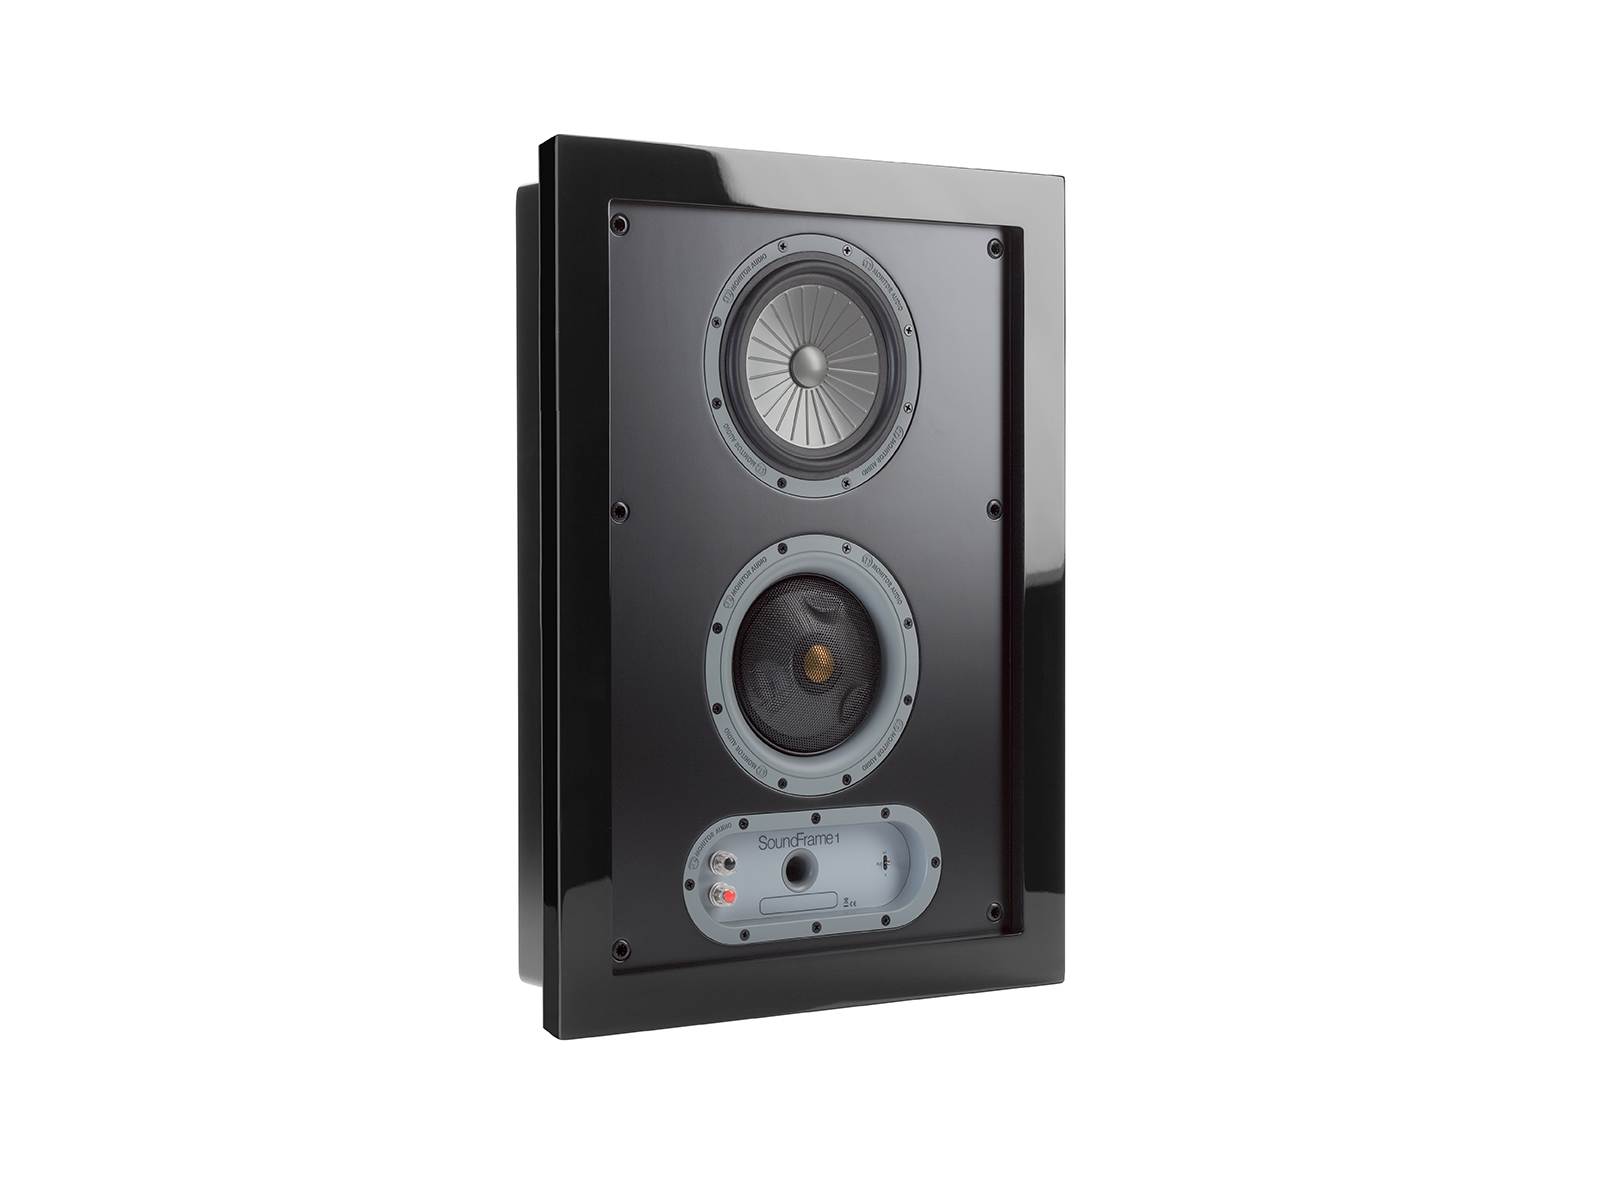 SoundFrame SF1, in-wall speakers, grille-less, with a high gloss black lacquer finish.